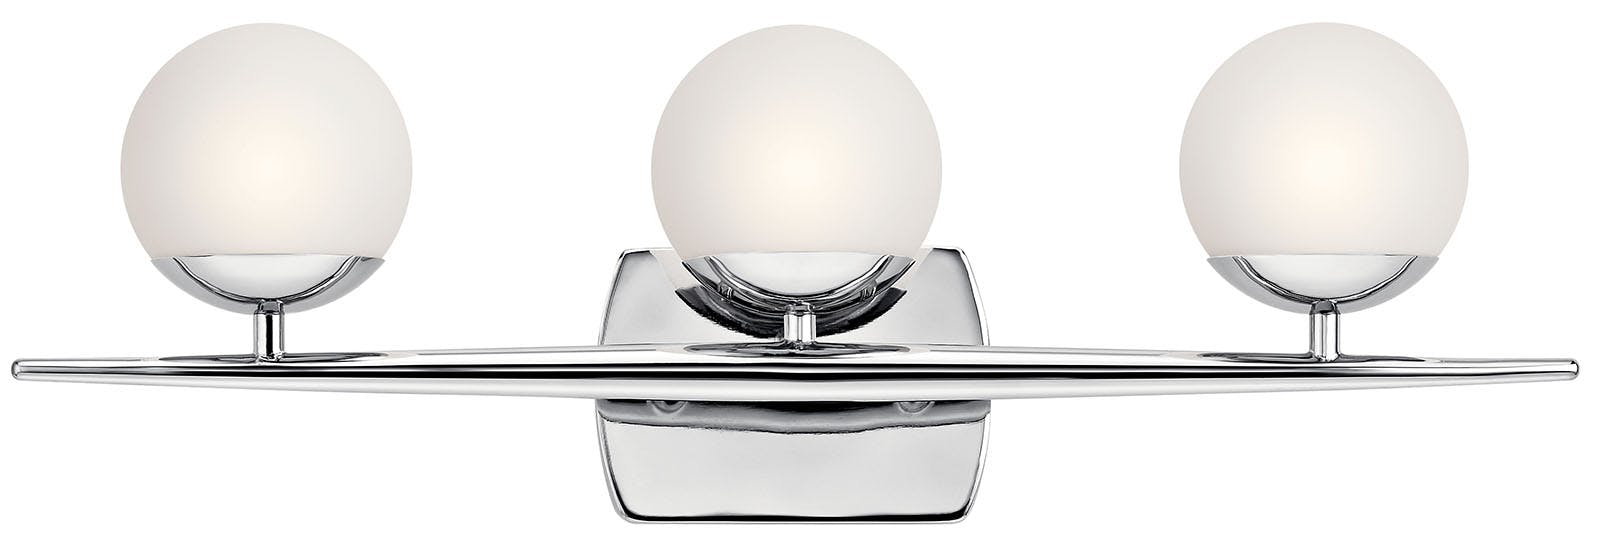 Front view of the Jasper 24.5" Halogen Vanity Light Chrome on a white background